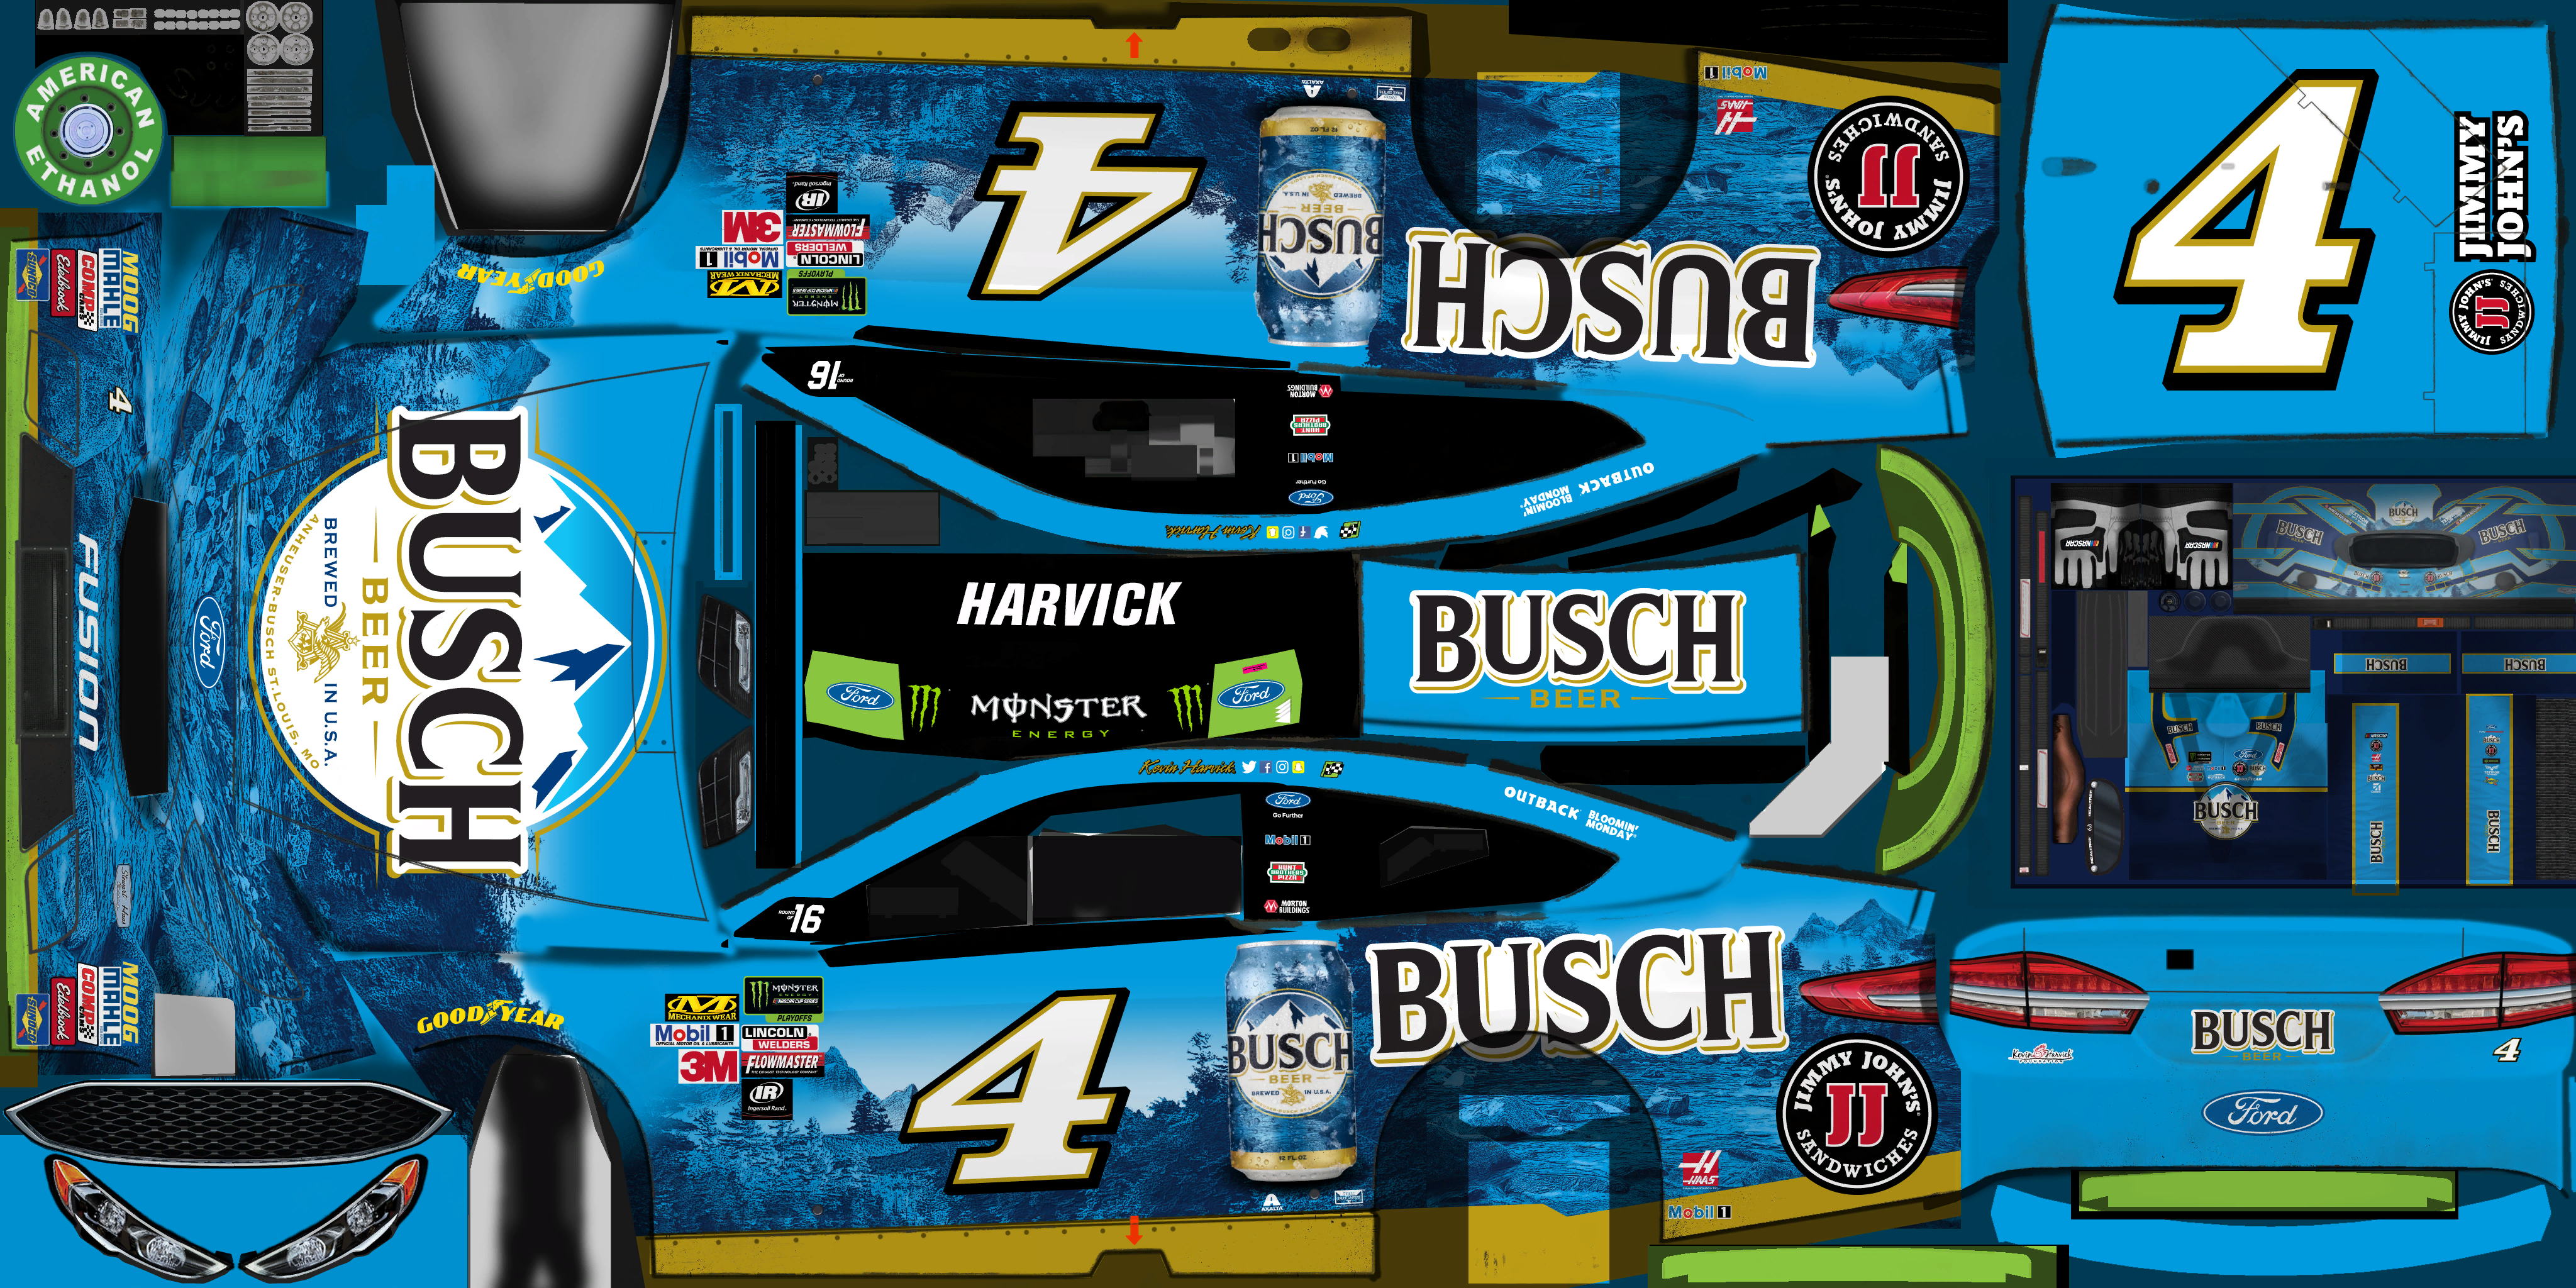 #4 Kevin Harvick (Dover II)